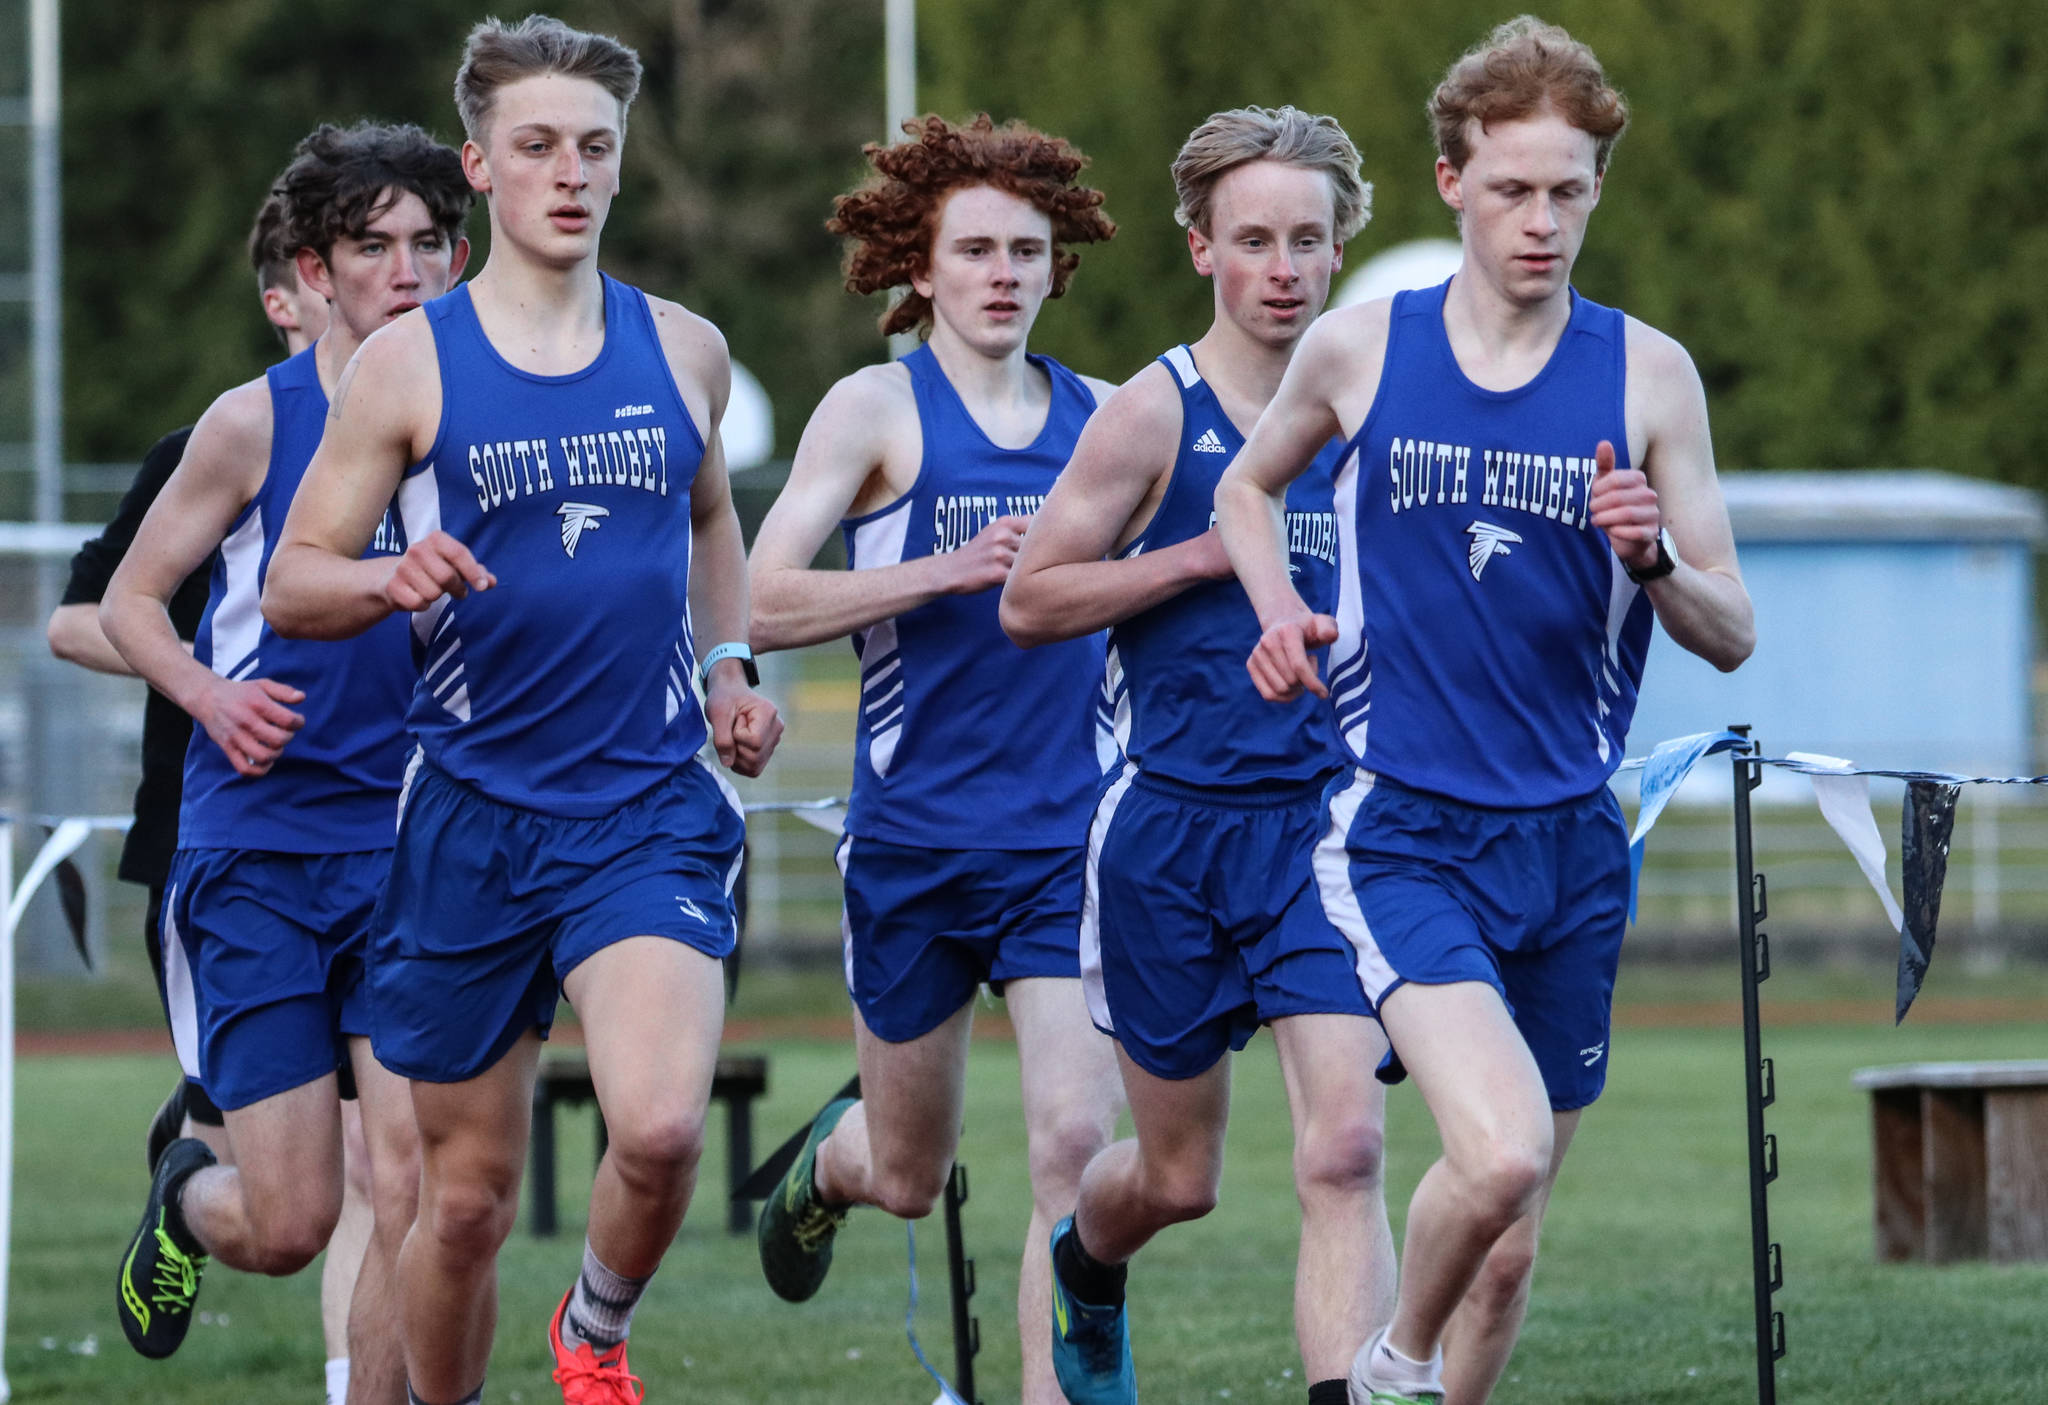 The South Whidbey boys team, from left to right include Aidan O’Brien, Cooper Ullman, Aidan Donnelly, Thomas Simms and Reilly McVay. Photo by Matt Simms.